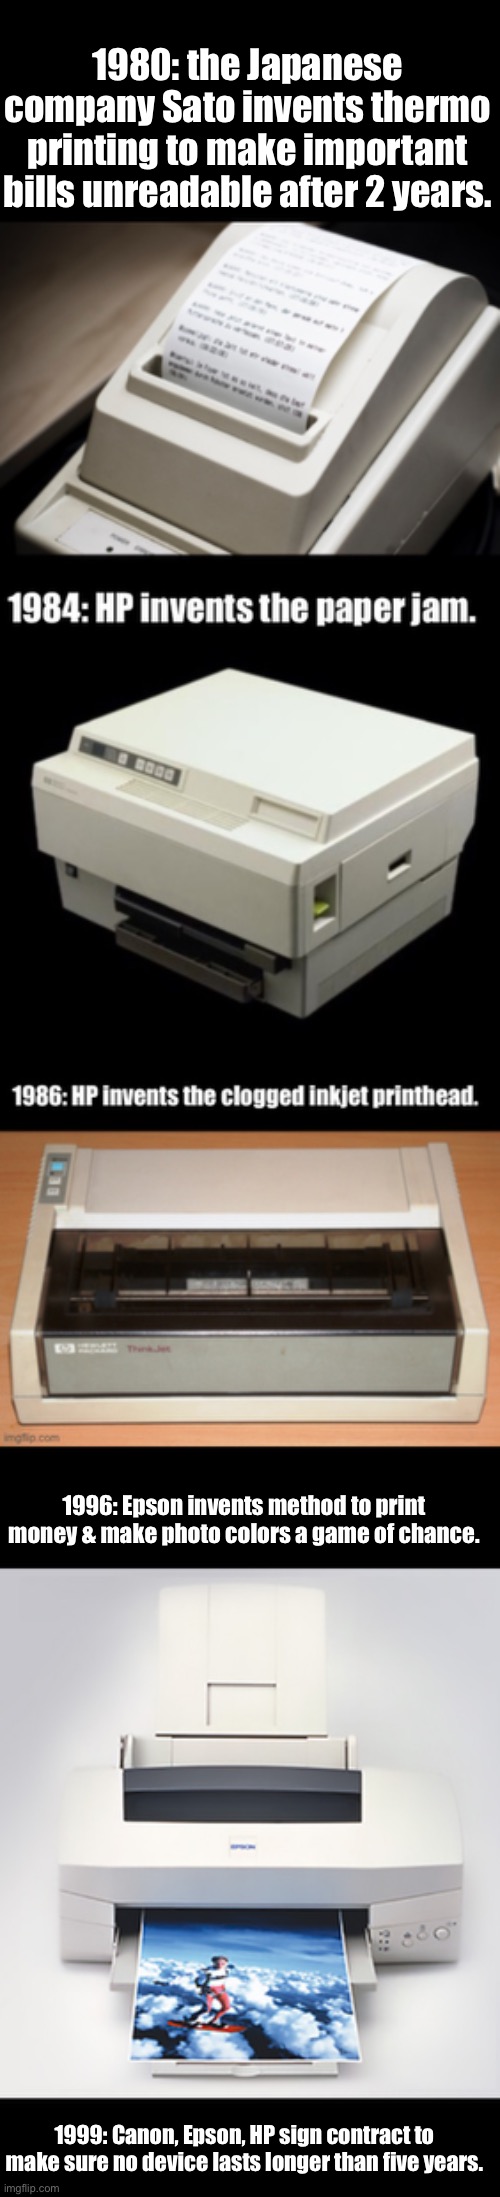 Printer history - the true story | 1980: the Japanese company Sato invents thermo printing to make important bills unreadable after 2 years. 1996: Epson invents method to print money & make photo colors a game of chance. 1999: Canon, Epson, HP sign contract to make sure no device lasts longer than five years. | image tagged in hp,epson,printer,computer | made w/ Imgflip meme maker